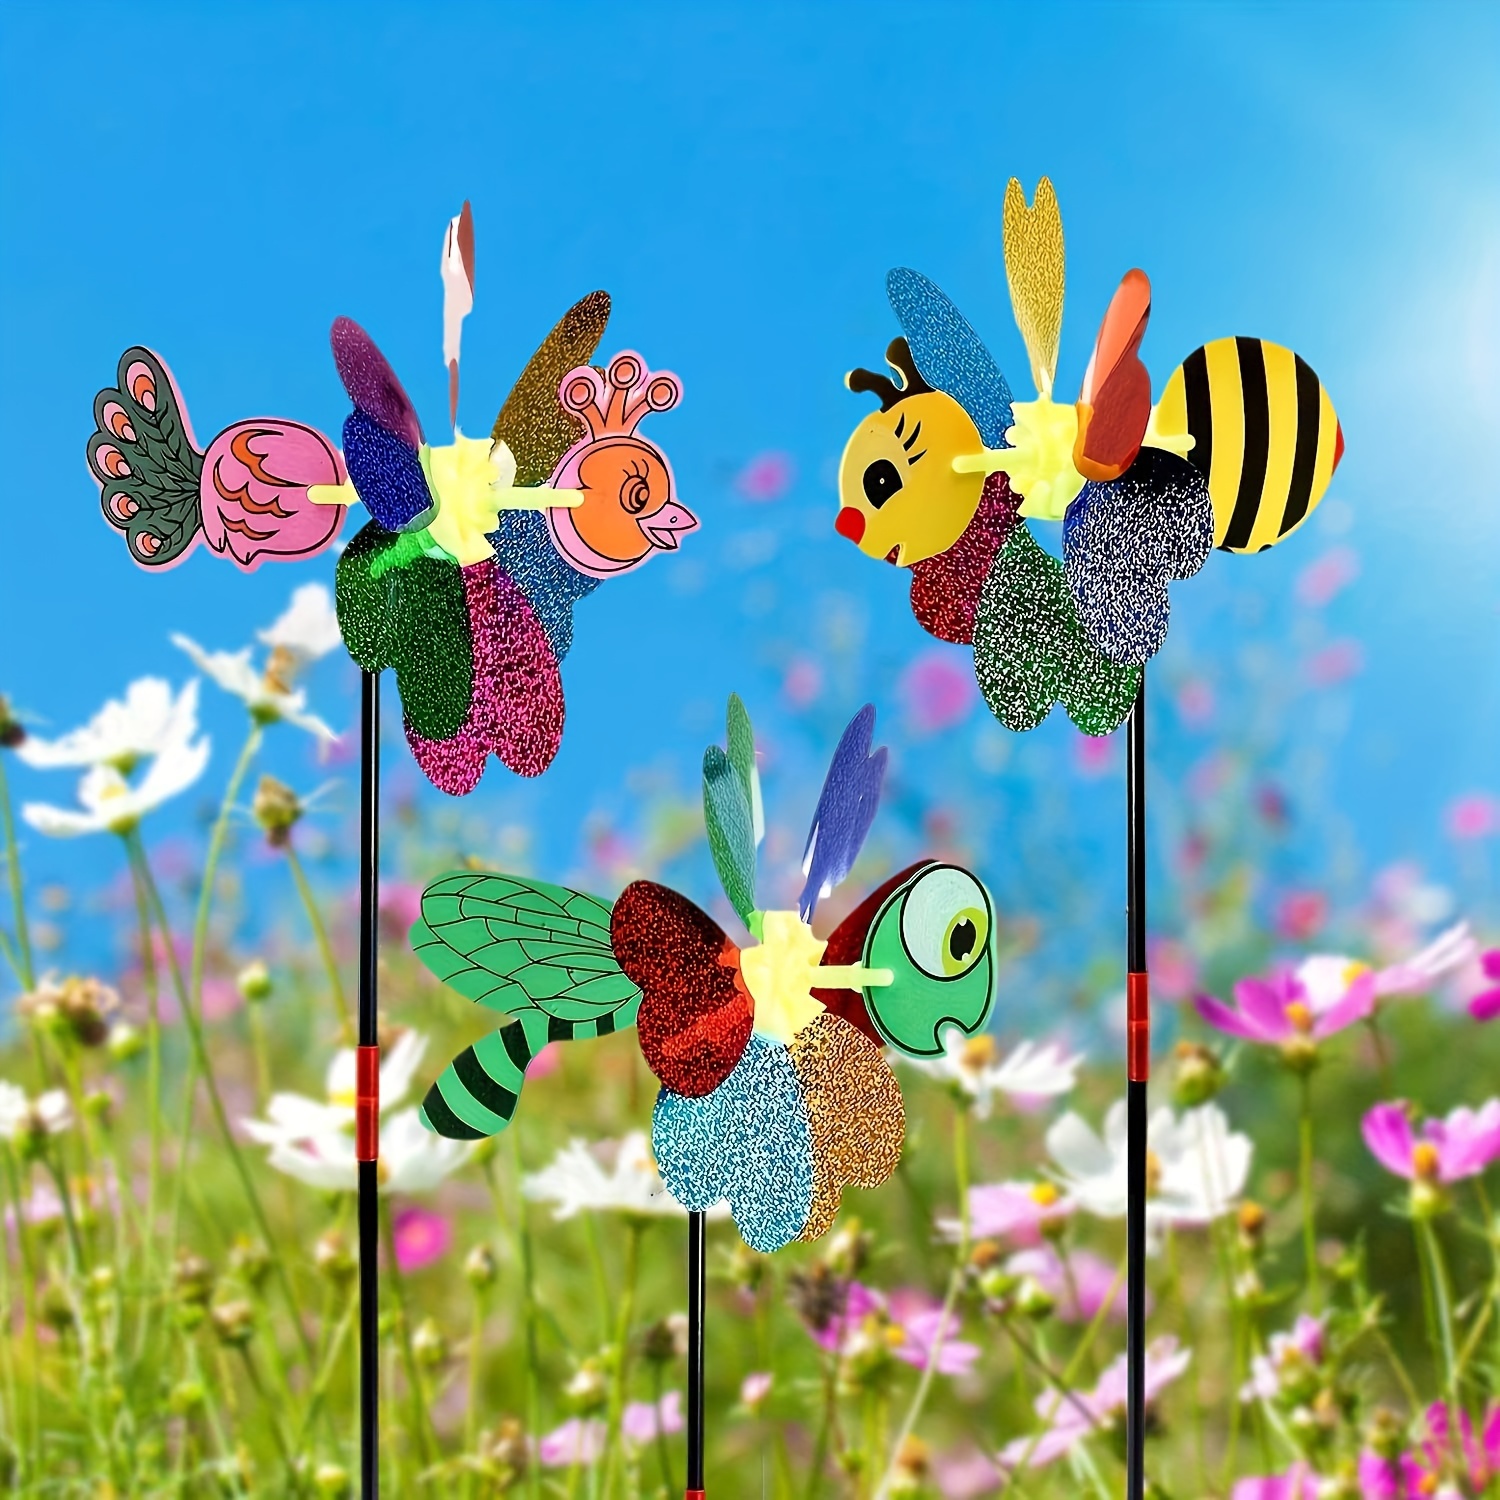 

1pc/2pcs Whimsical Glitter Garden Wind Spinners, Colorful Insect Designs With Bee, Dragonfly, Bird, 22-inch Height, Plastic Outdoor Yard Art Decorations